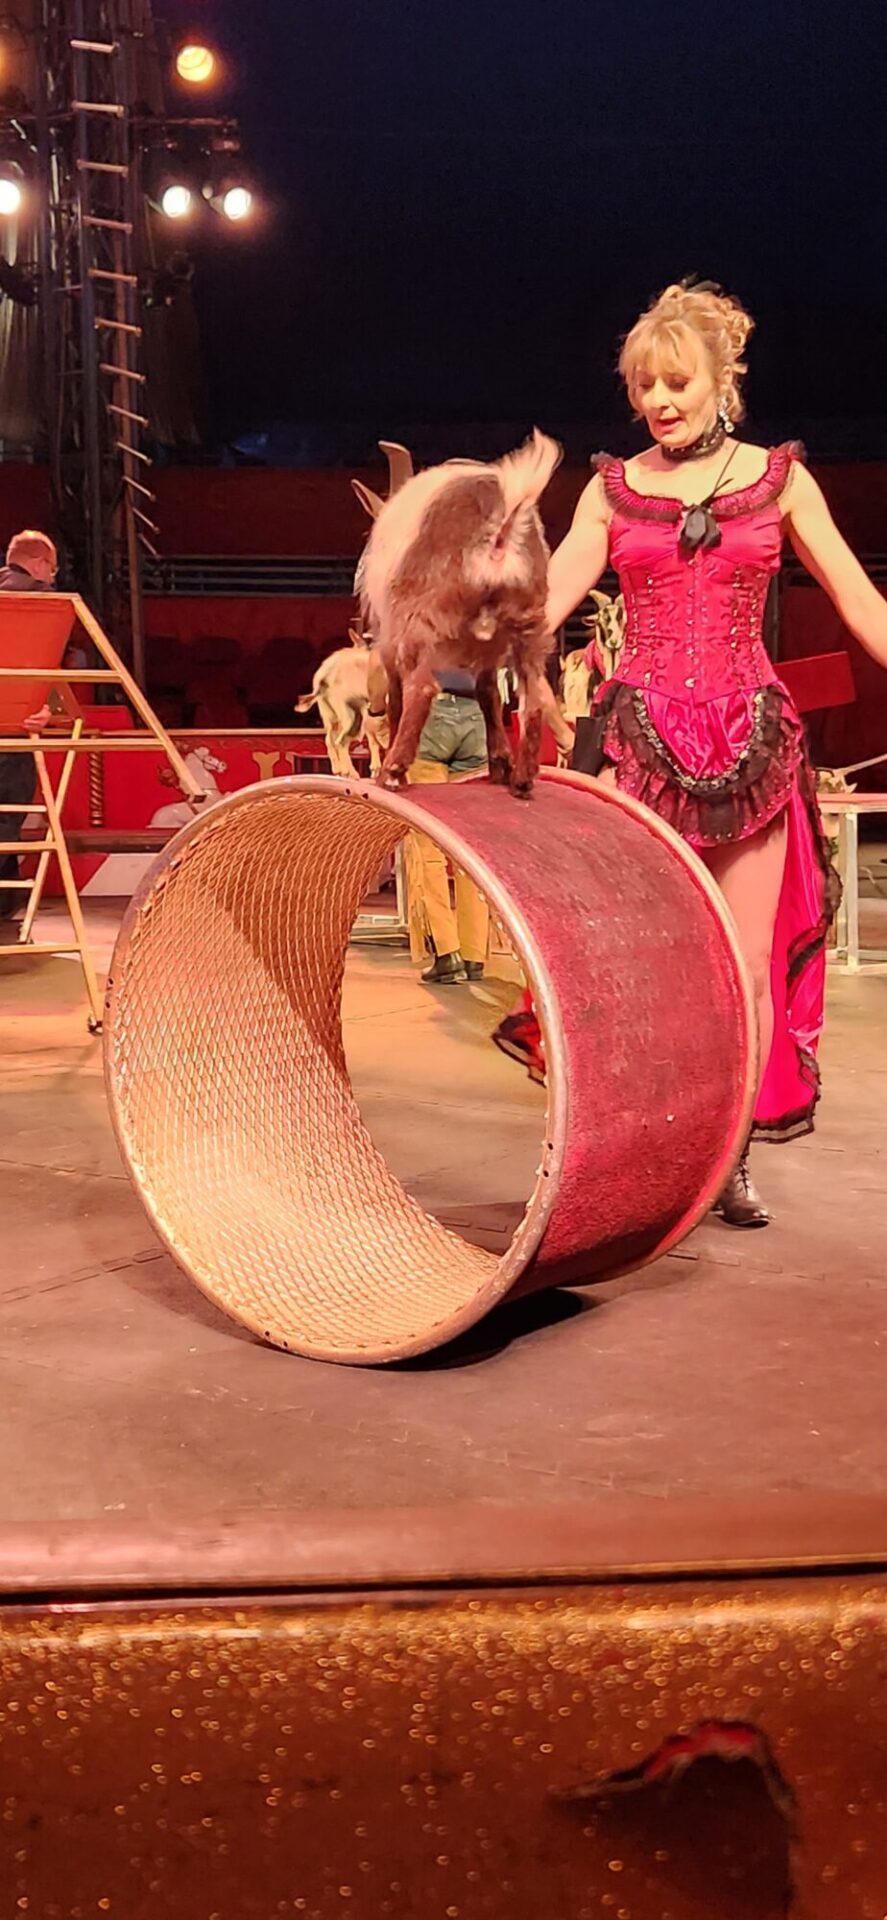 goat in circus show